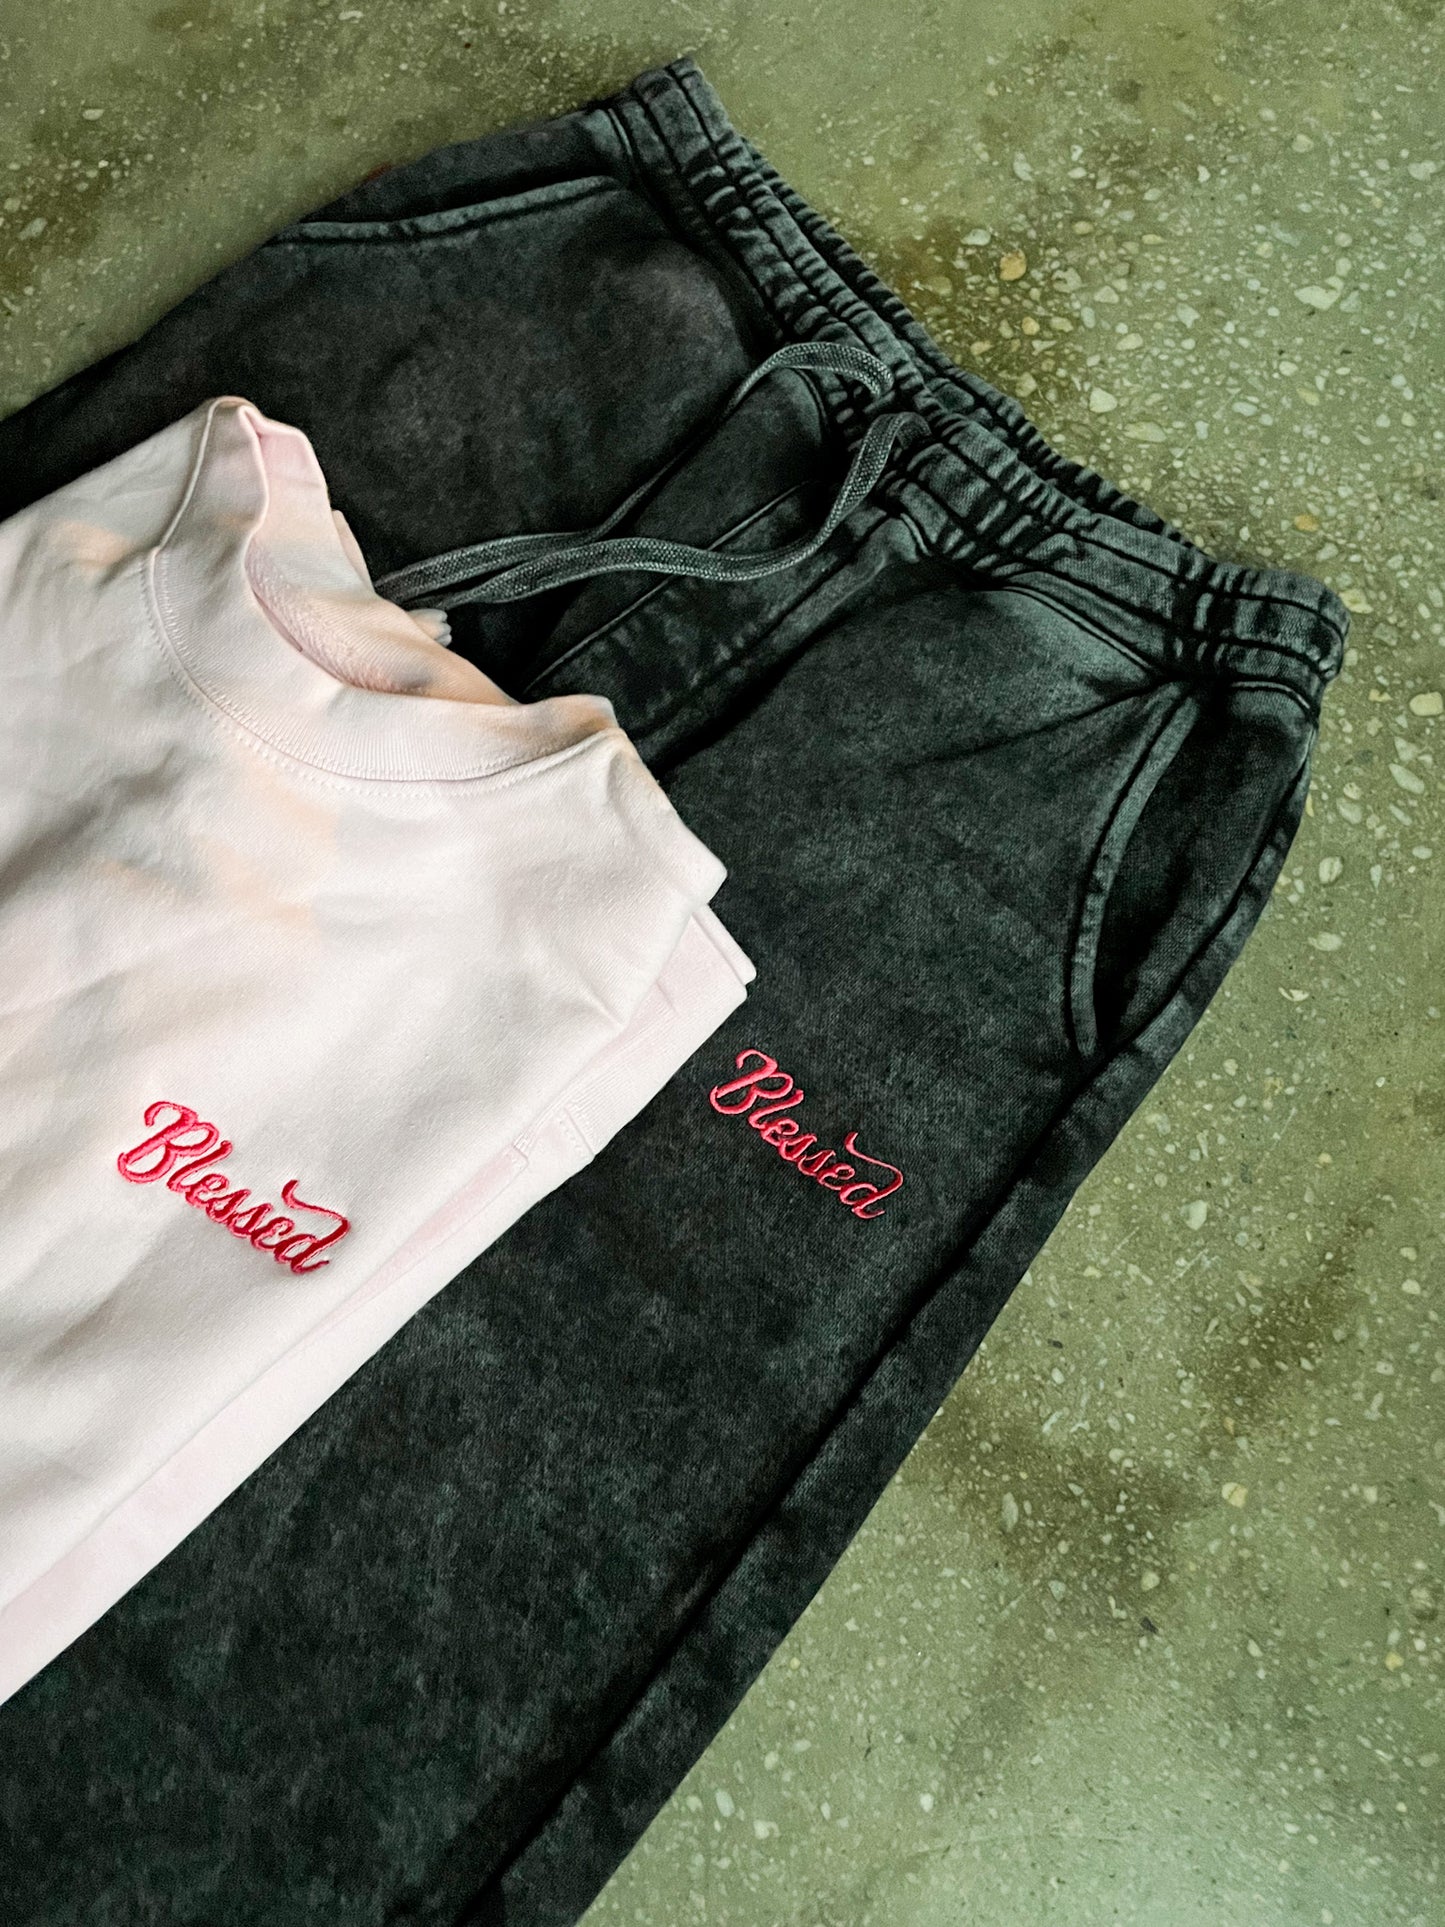 Blessed Embroidered Adult/Unisex Sweatpants